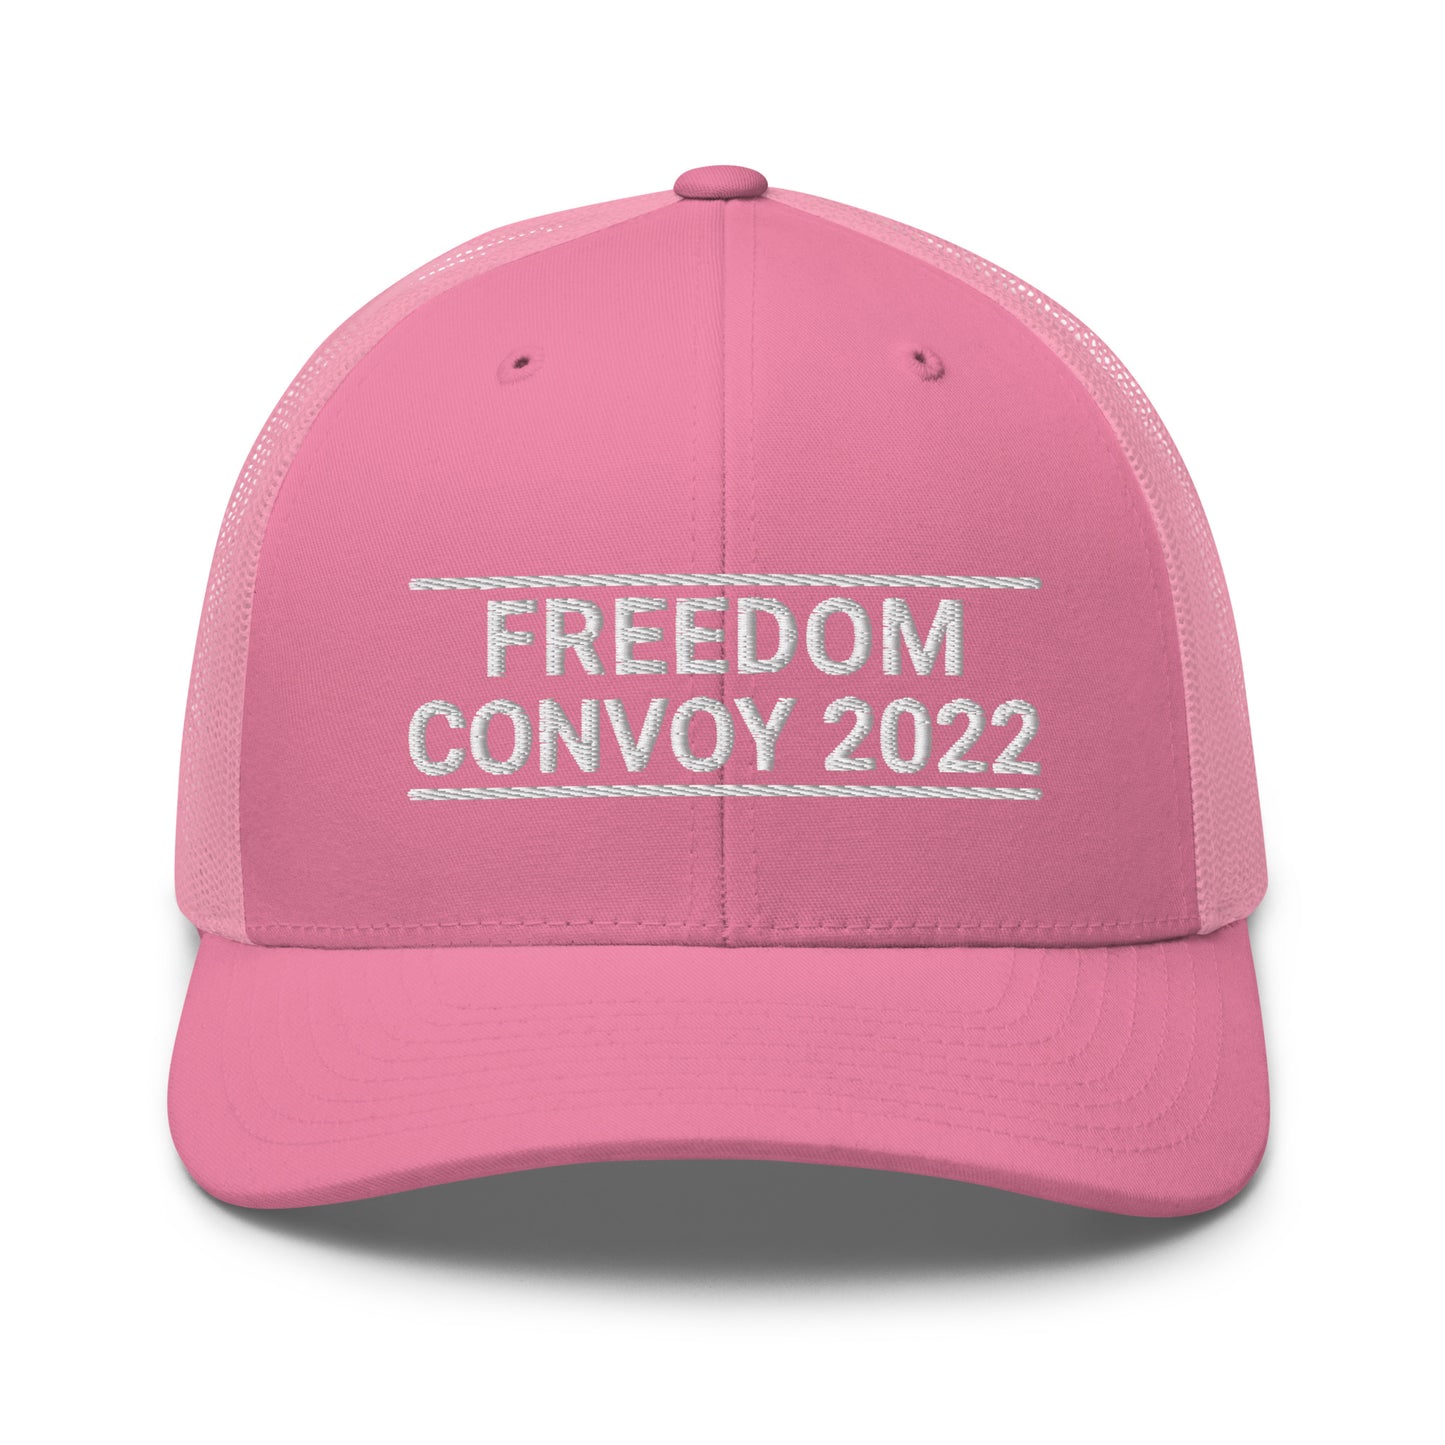 Freedom Convoy 2022 Yupoong 6606 pink hat.